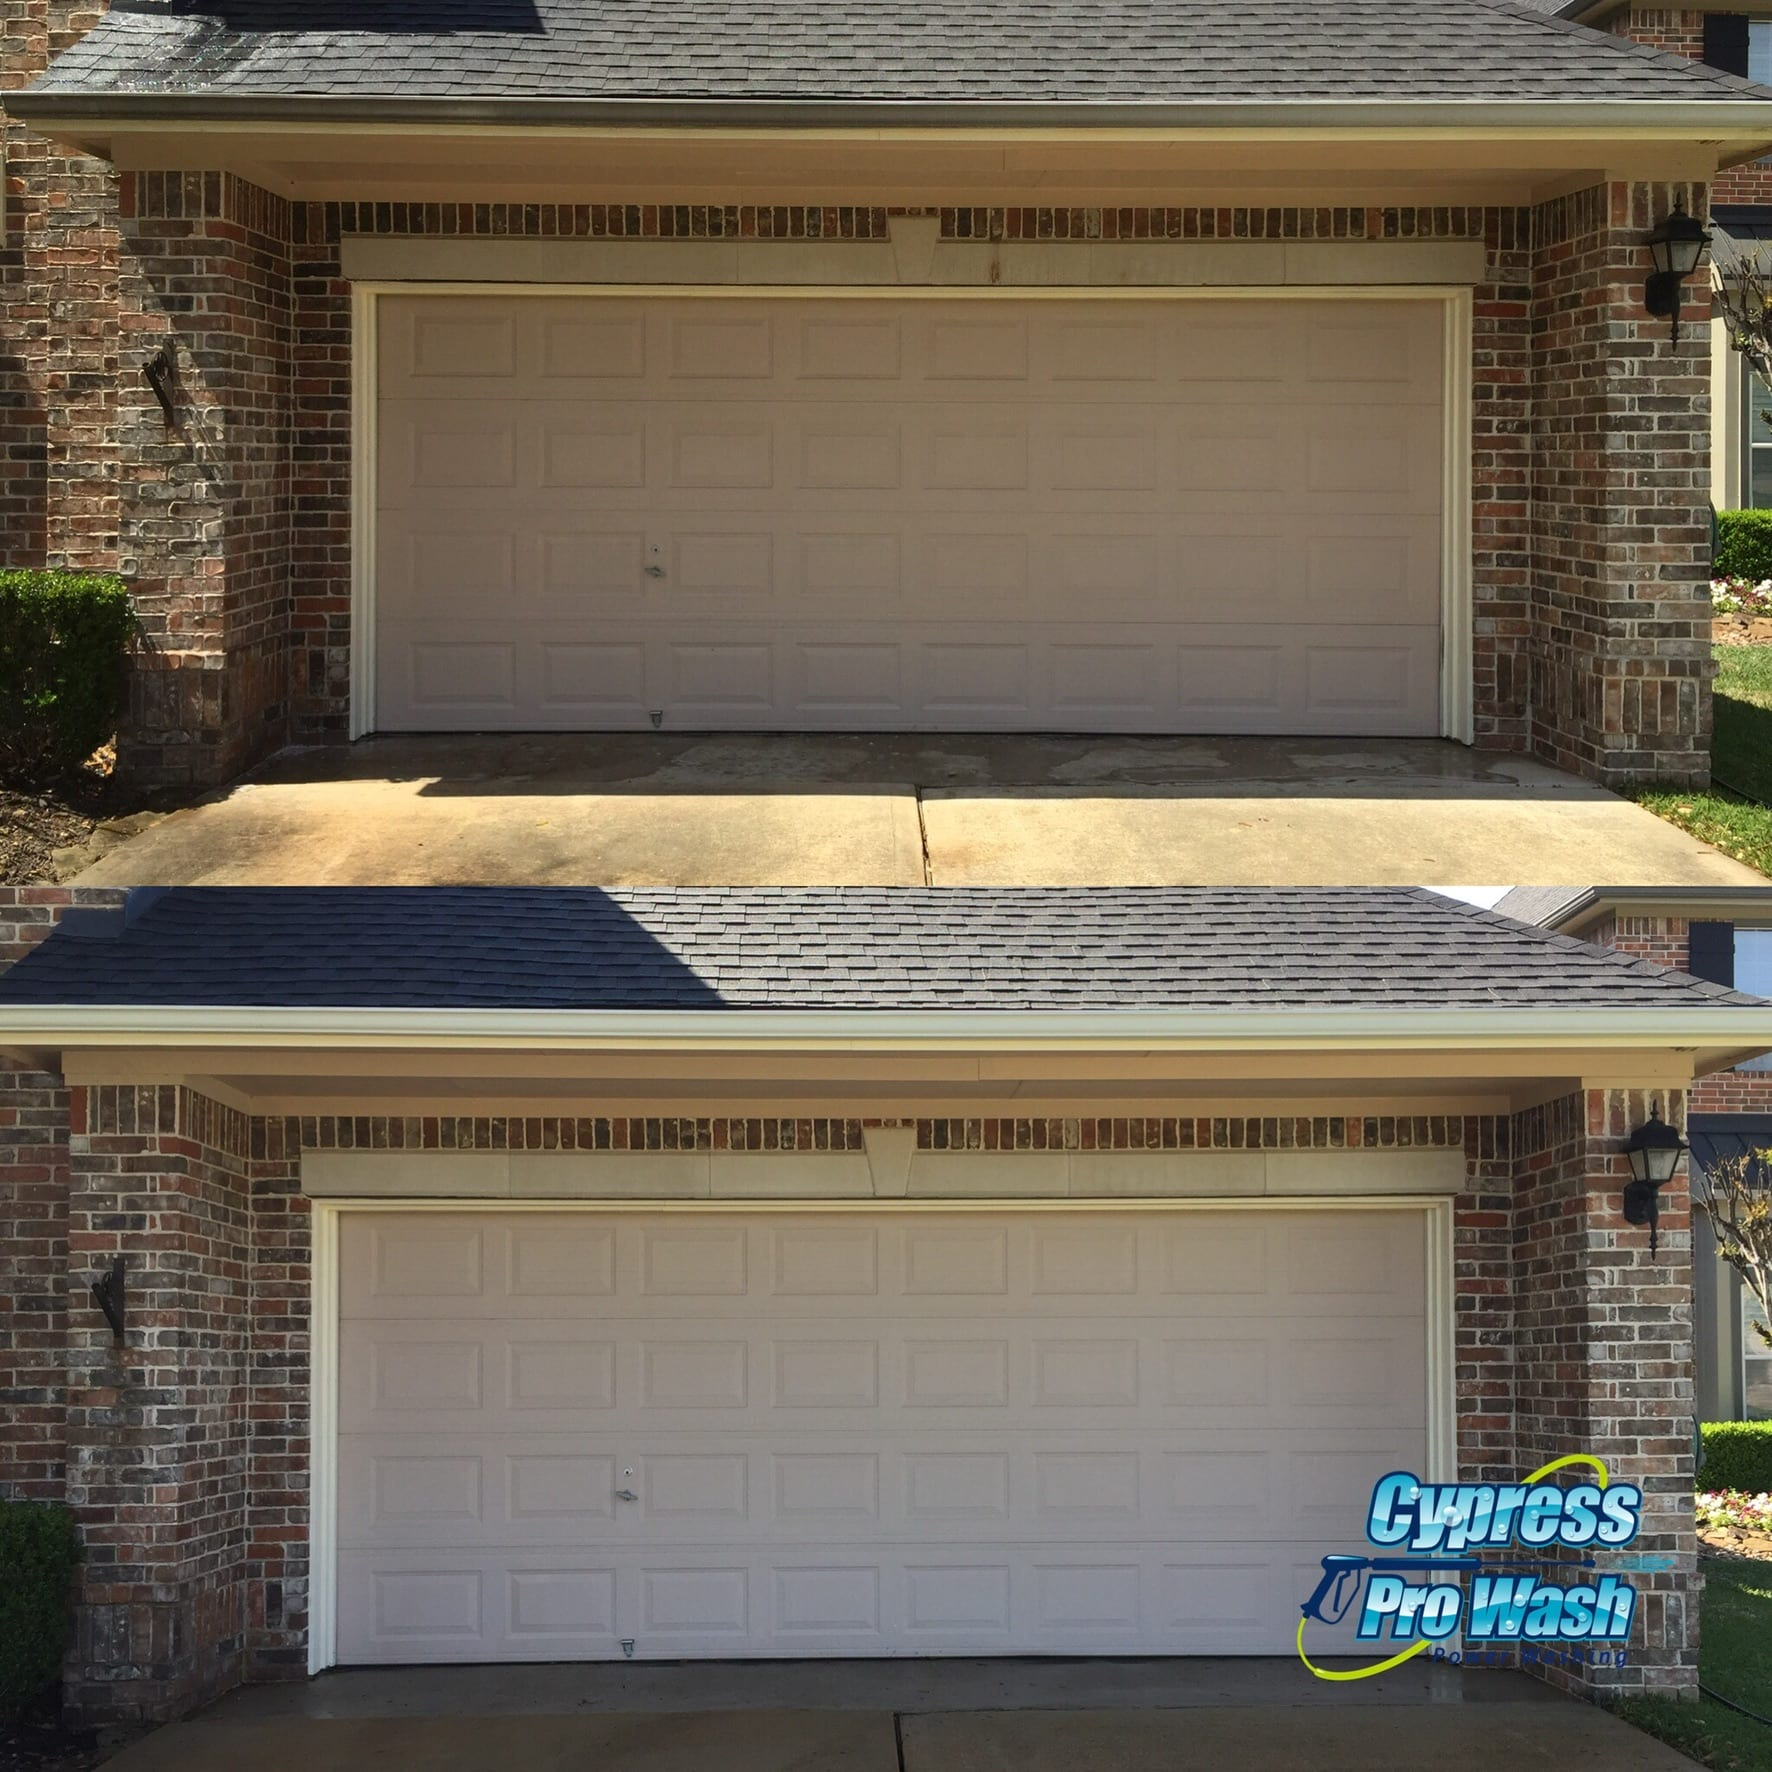 Rejuvenate Home's Exterior with Cypress Pro Wash's Gentle Yet Powerful Soft House Washing